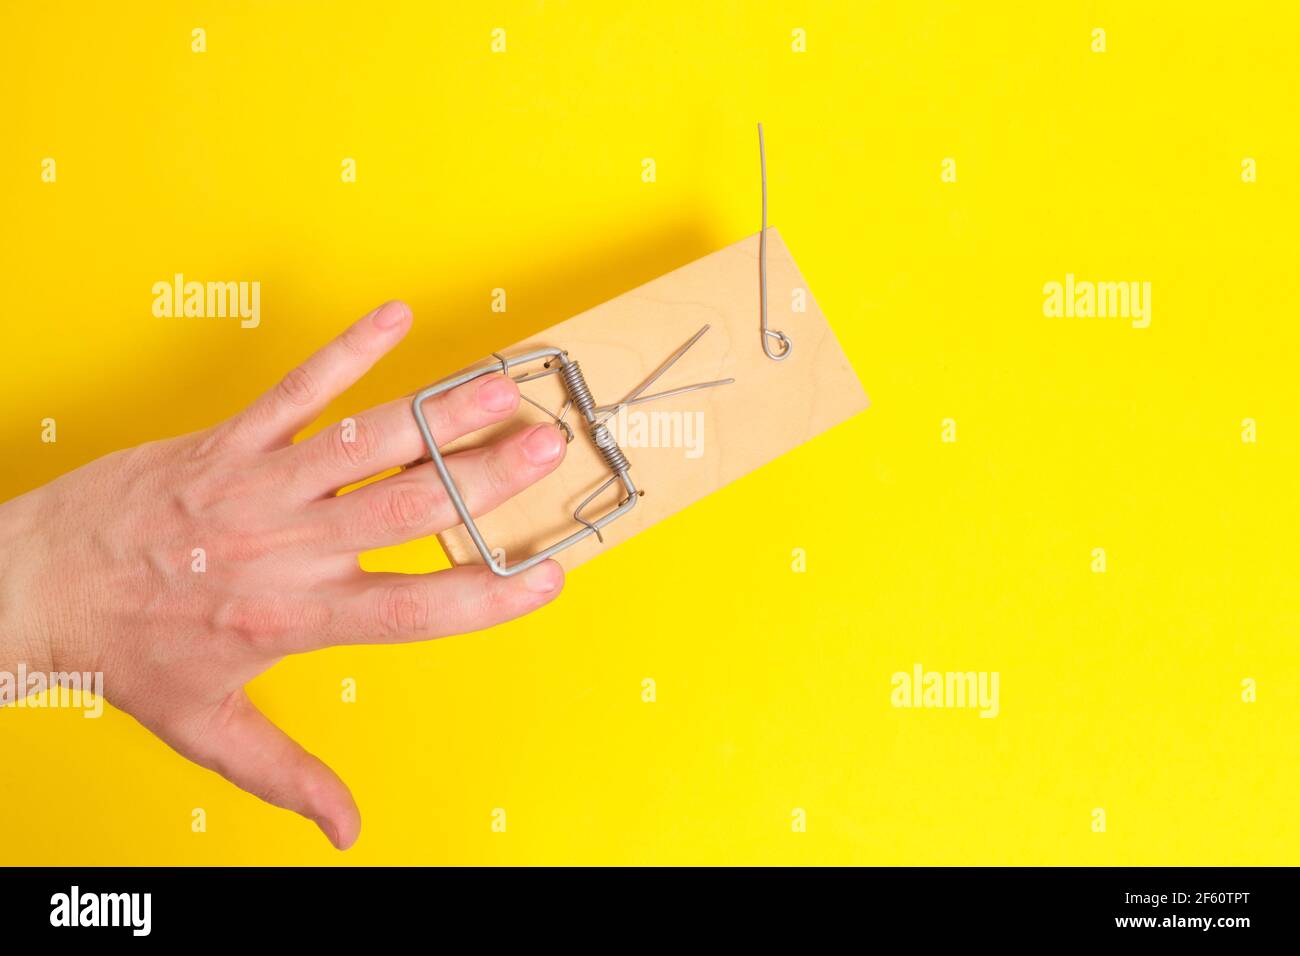 Man hand was caught in a mousetrap on a yellow background.Concept, risks, and failures Stock Photo